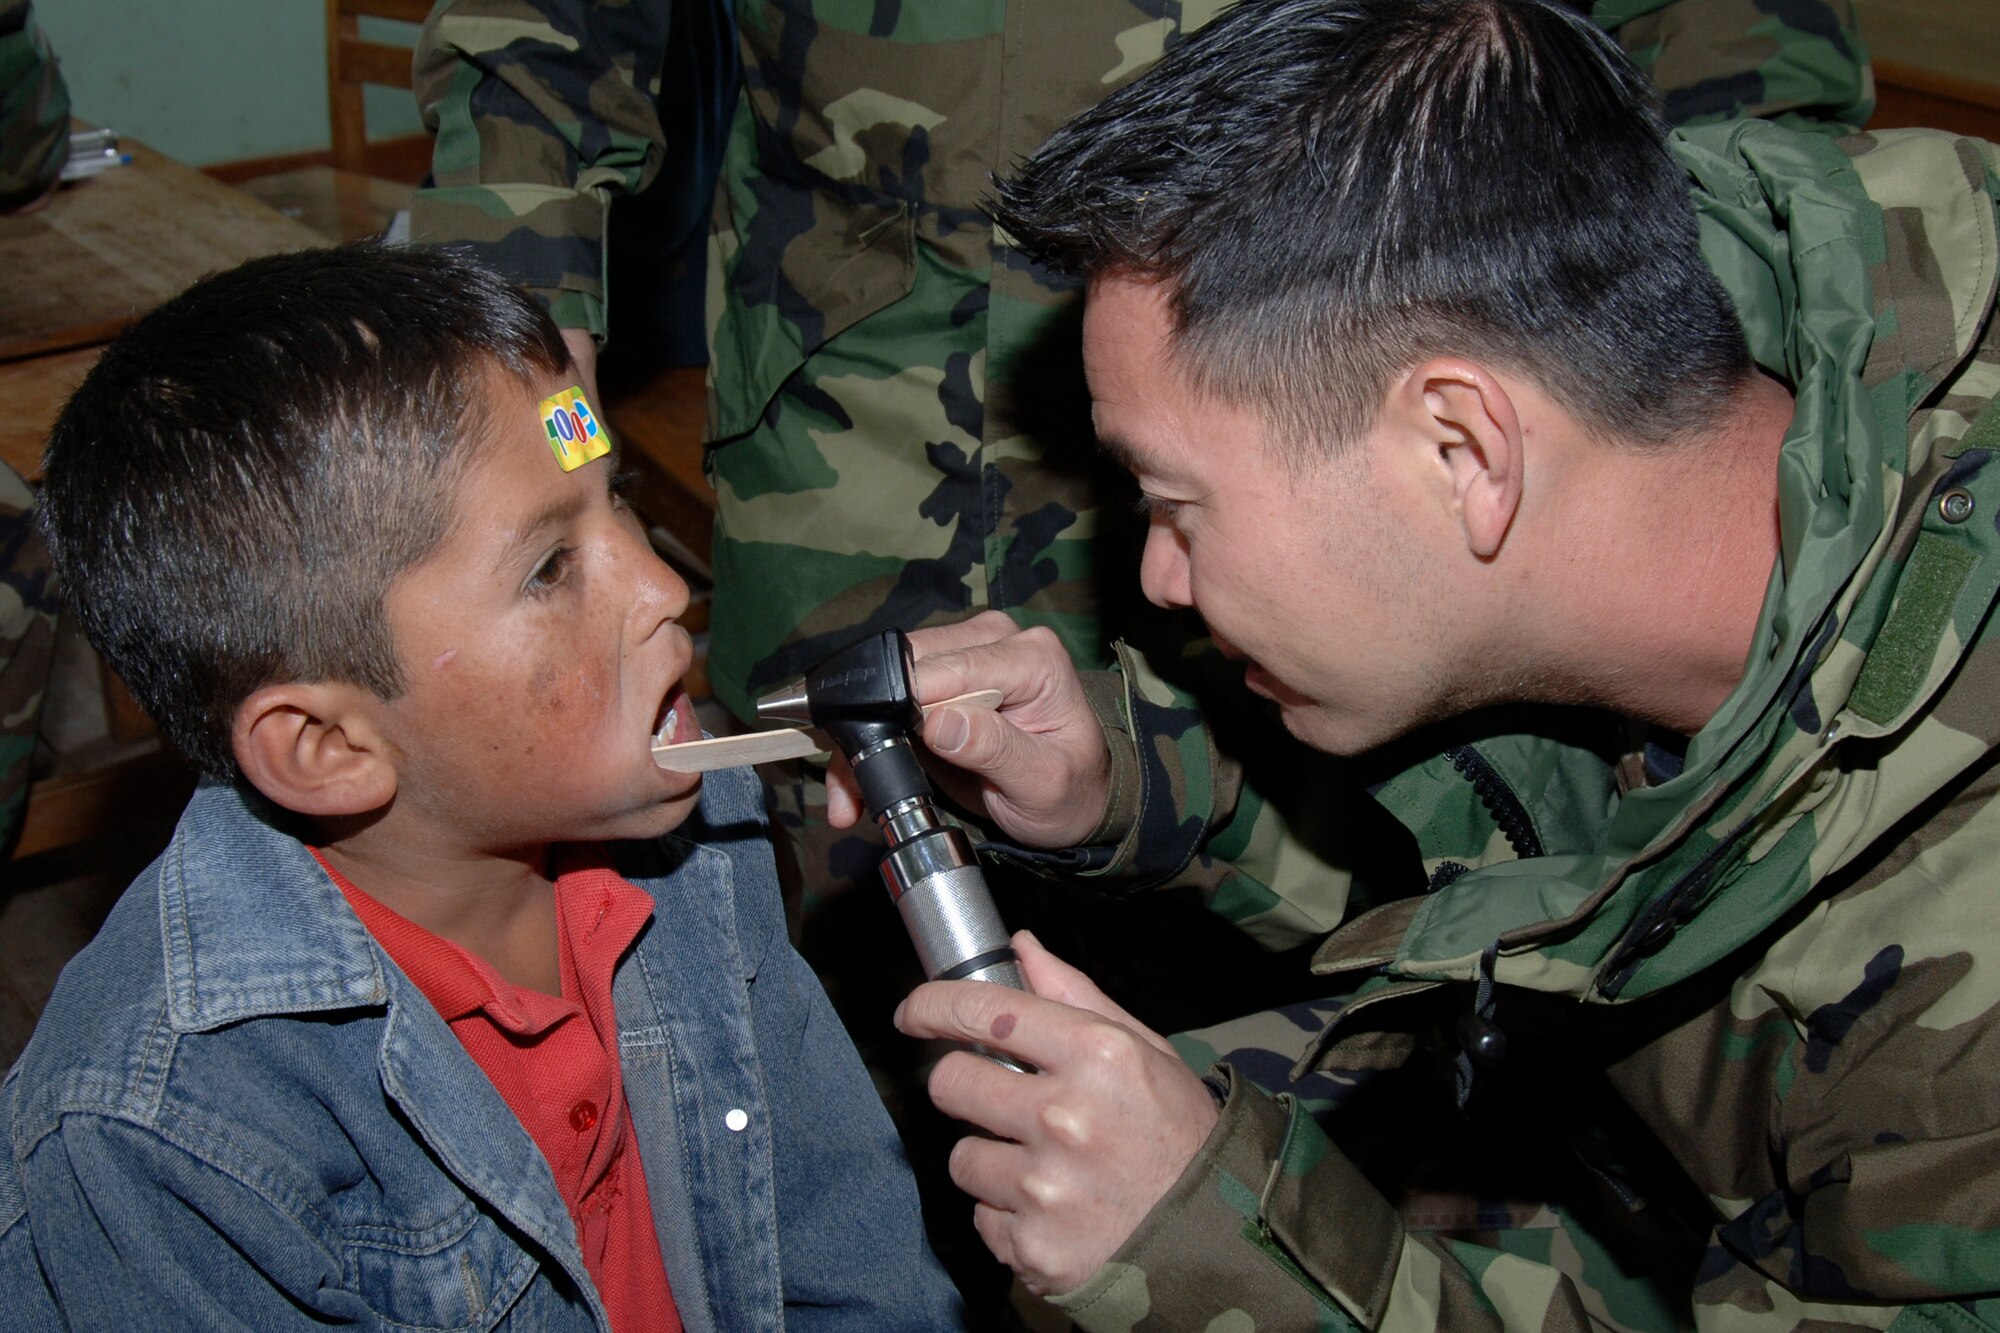 Capt. Truong Quach, a doctor from March Air Reserve Base, Calif., performs a general medical examination on a Peruvian boy, June 30, during a medical mission in Chiara, Peru.  More than 30 Air Force medical personnel deployed to Peru to support New Horizons - Peru 2008, a U.S. and Peruvian humanitarian mission that will bring quality-of-life construction and medical projects to underprivileged Peruvians. (U.S. Air Force Photo/1st Lt. Mary Pekas)